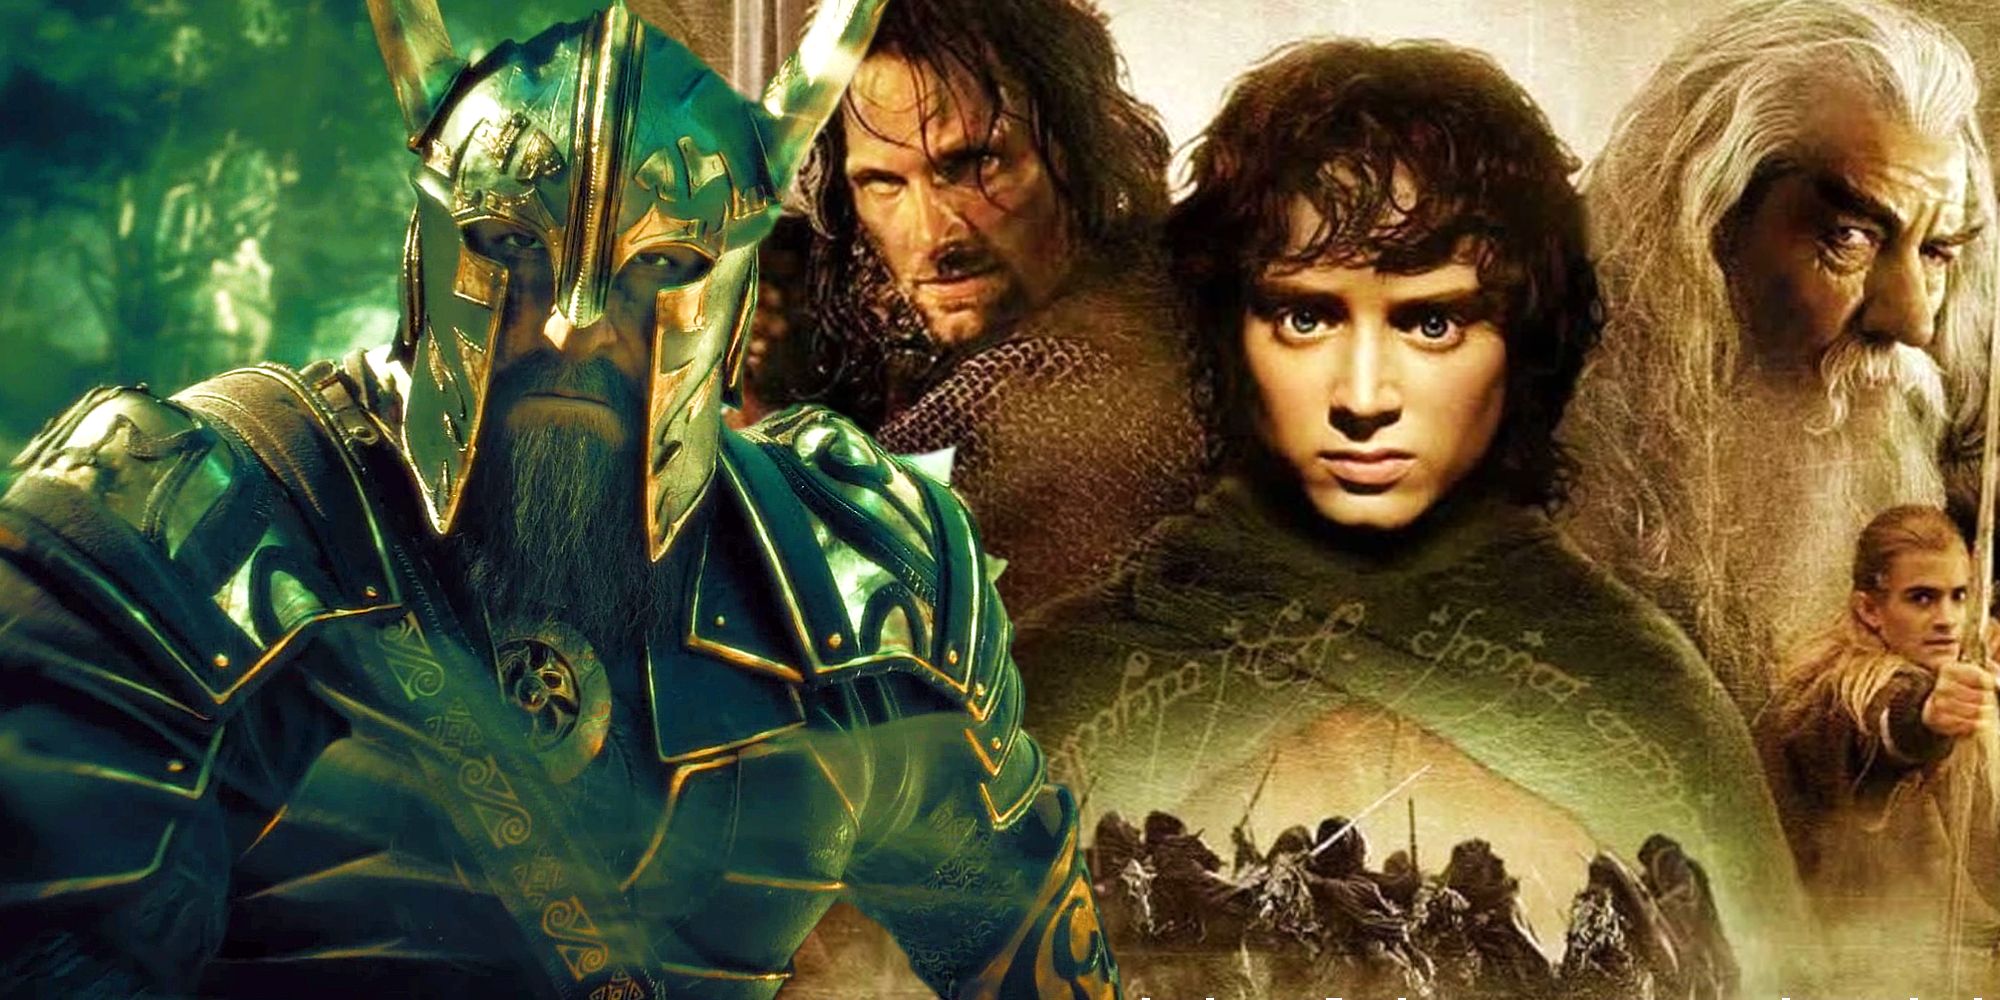 Future Lord Of The Rings Movies Have A Major Title Problem (Including War Of The Rohirrim)